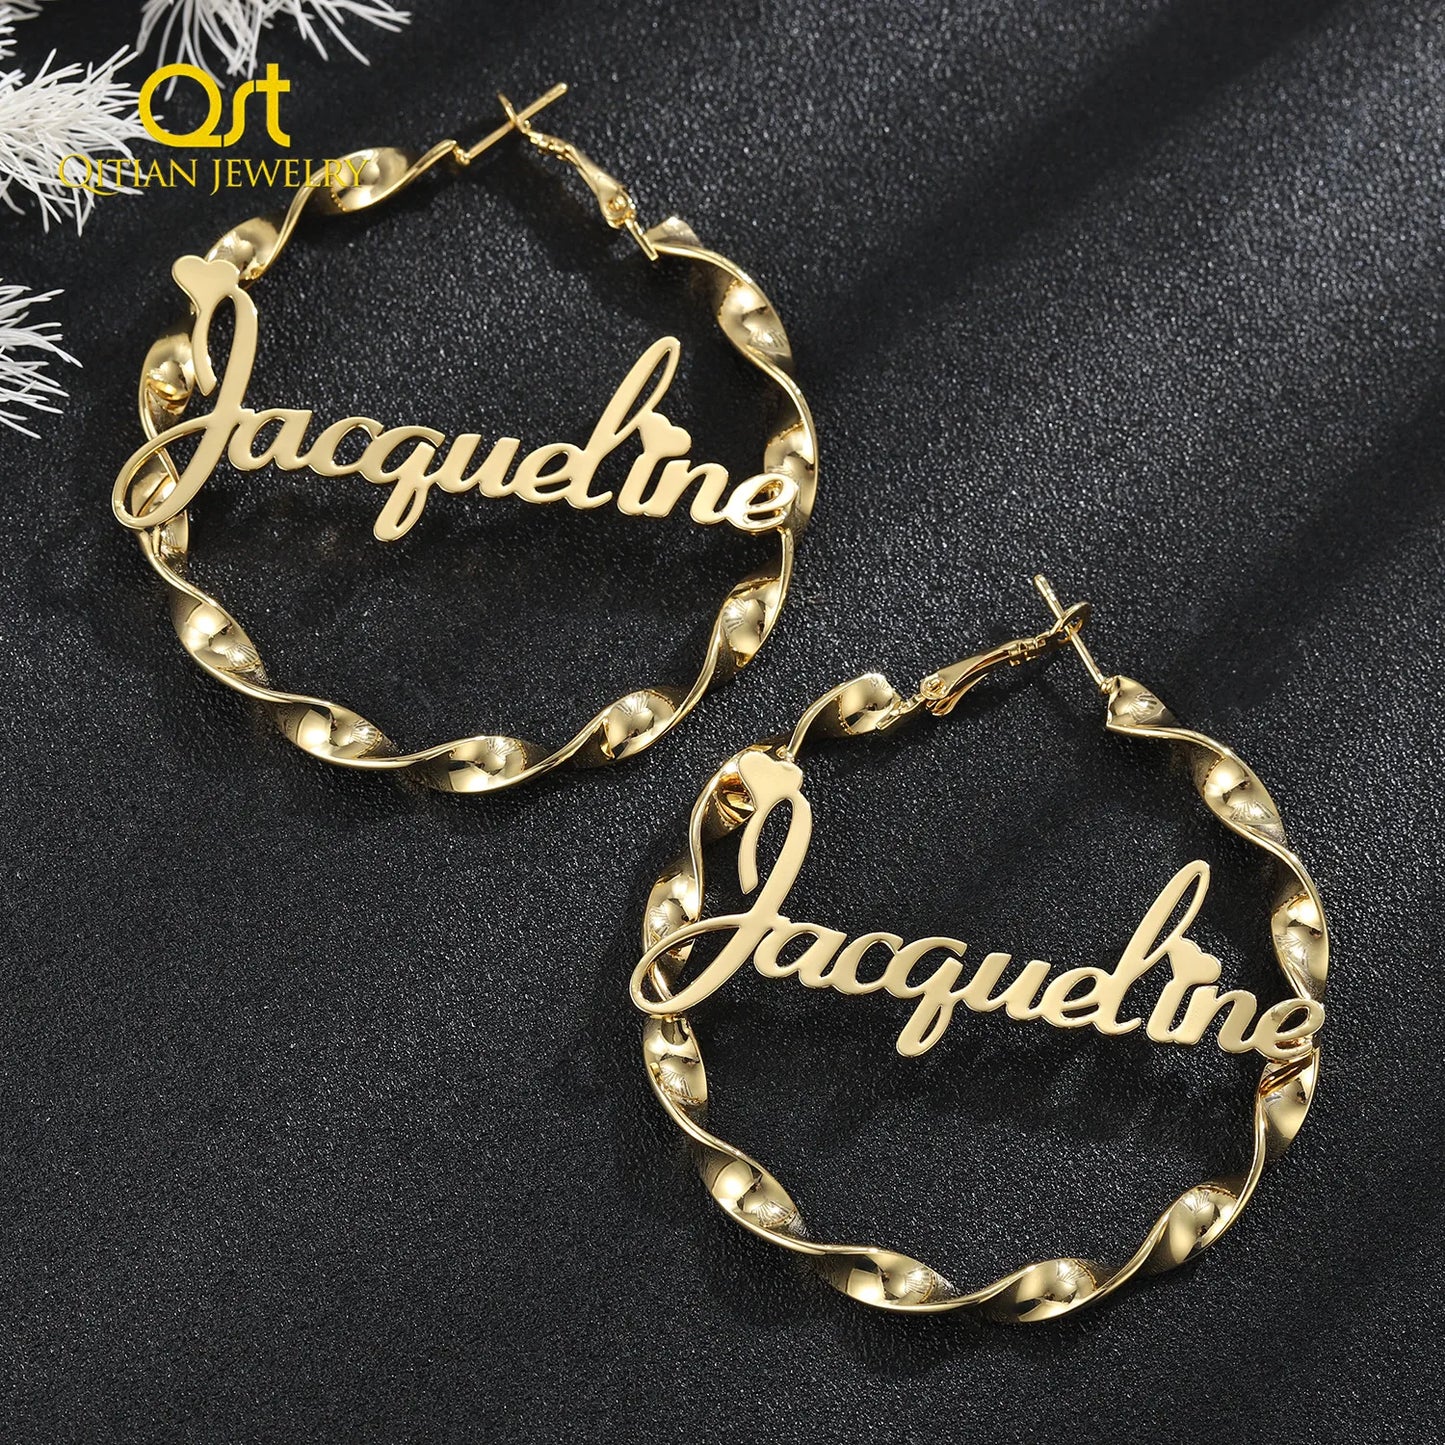 45mm-85mm Custom Hoop Earrings Customize Name Earrings Twist hoop earrings Personality Earrings With Statement Words Hiphop Sexy